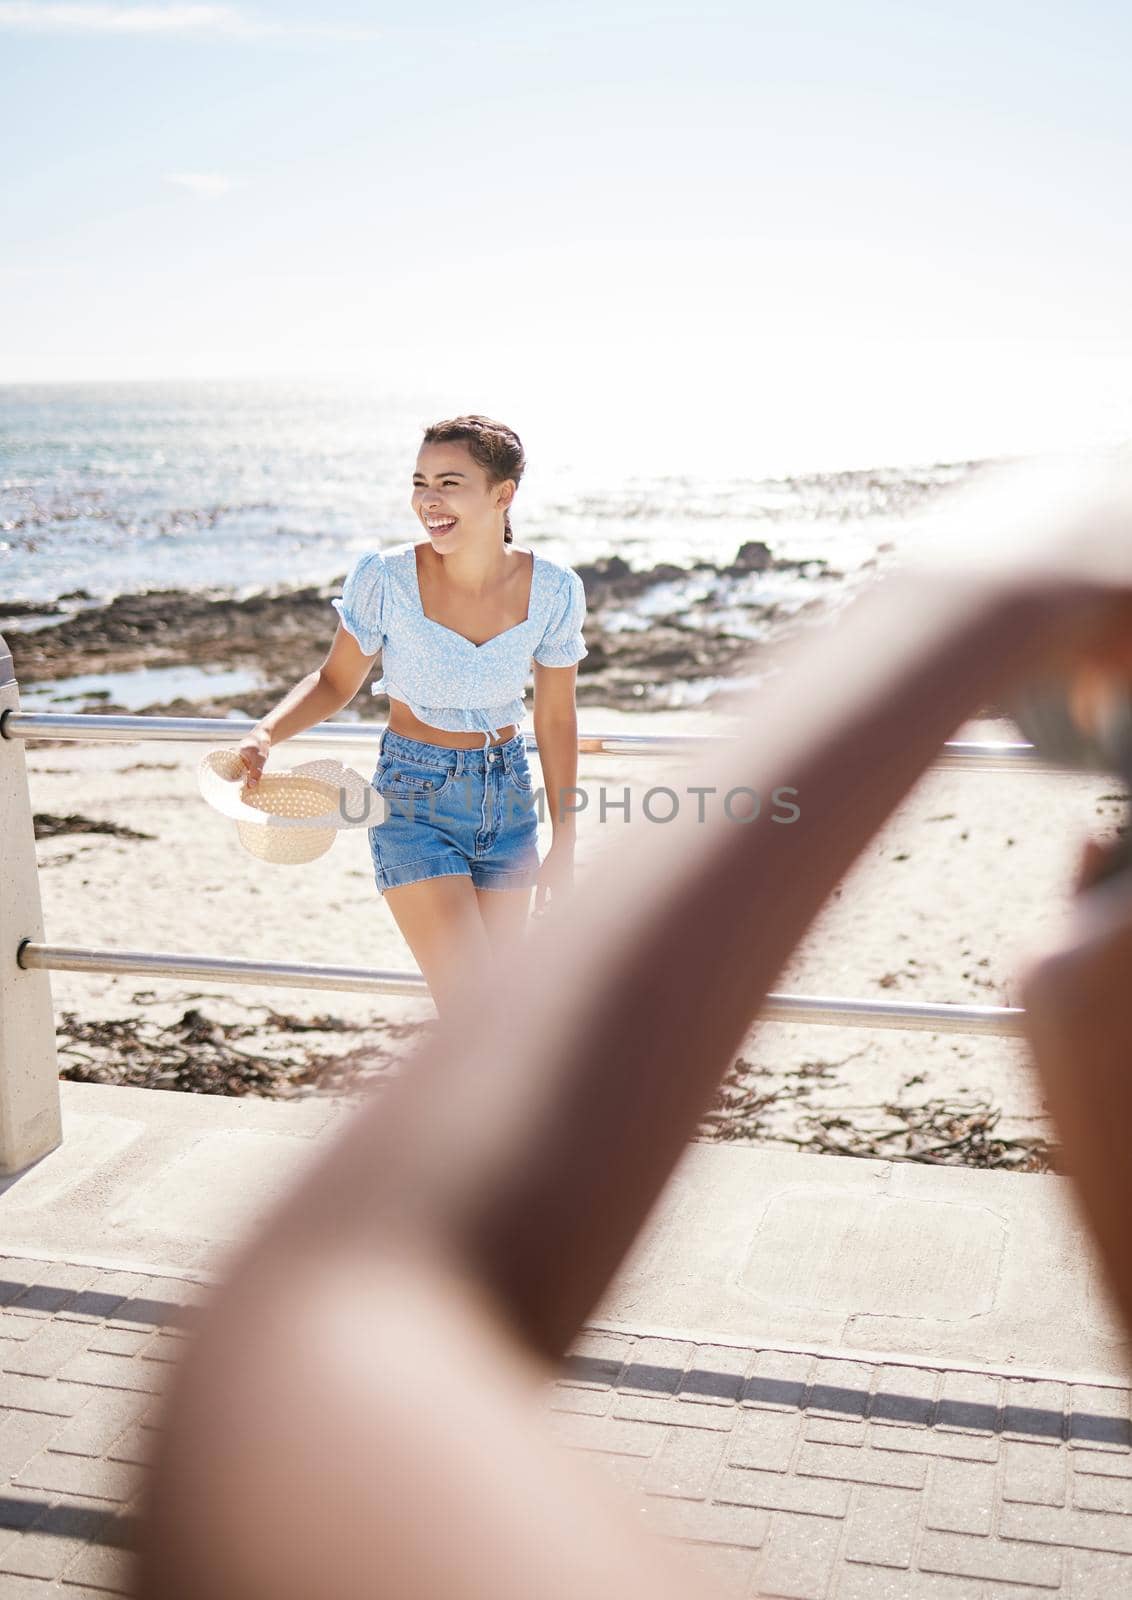 Beach travel photography of social media woman influencer on summer holiday or seaside water vacation destination. Happy, smile or excited young girl enjoy ocean, sand and blue sky sunset Hawaii trip by YuriArcurs